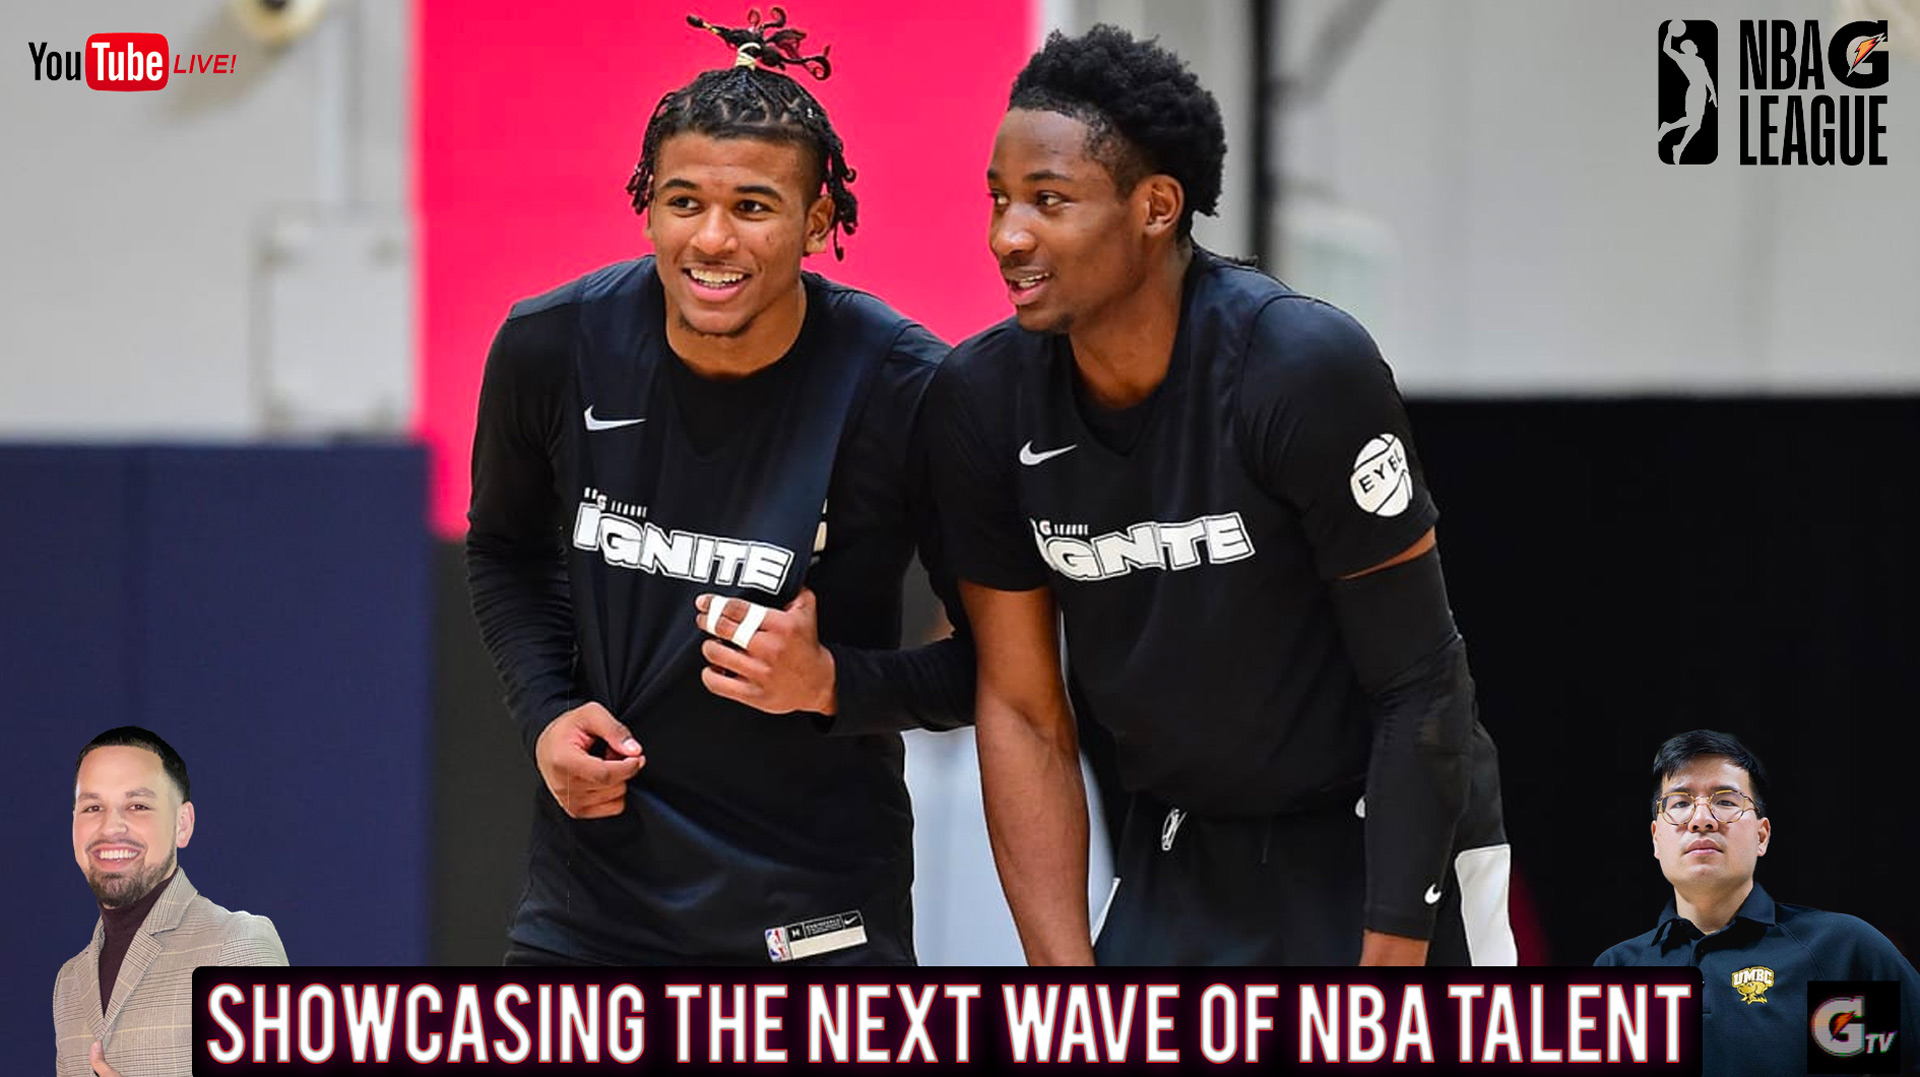 Showcasing the Next Wave of NBA Talent